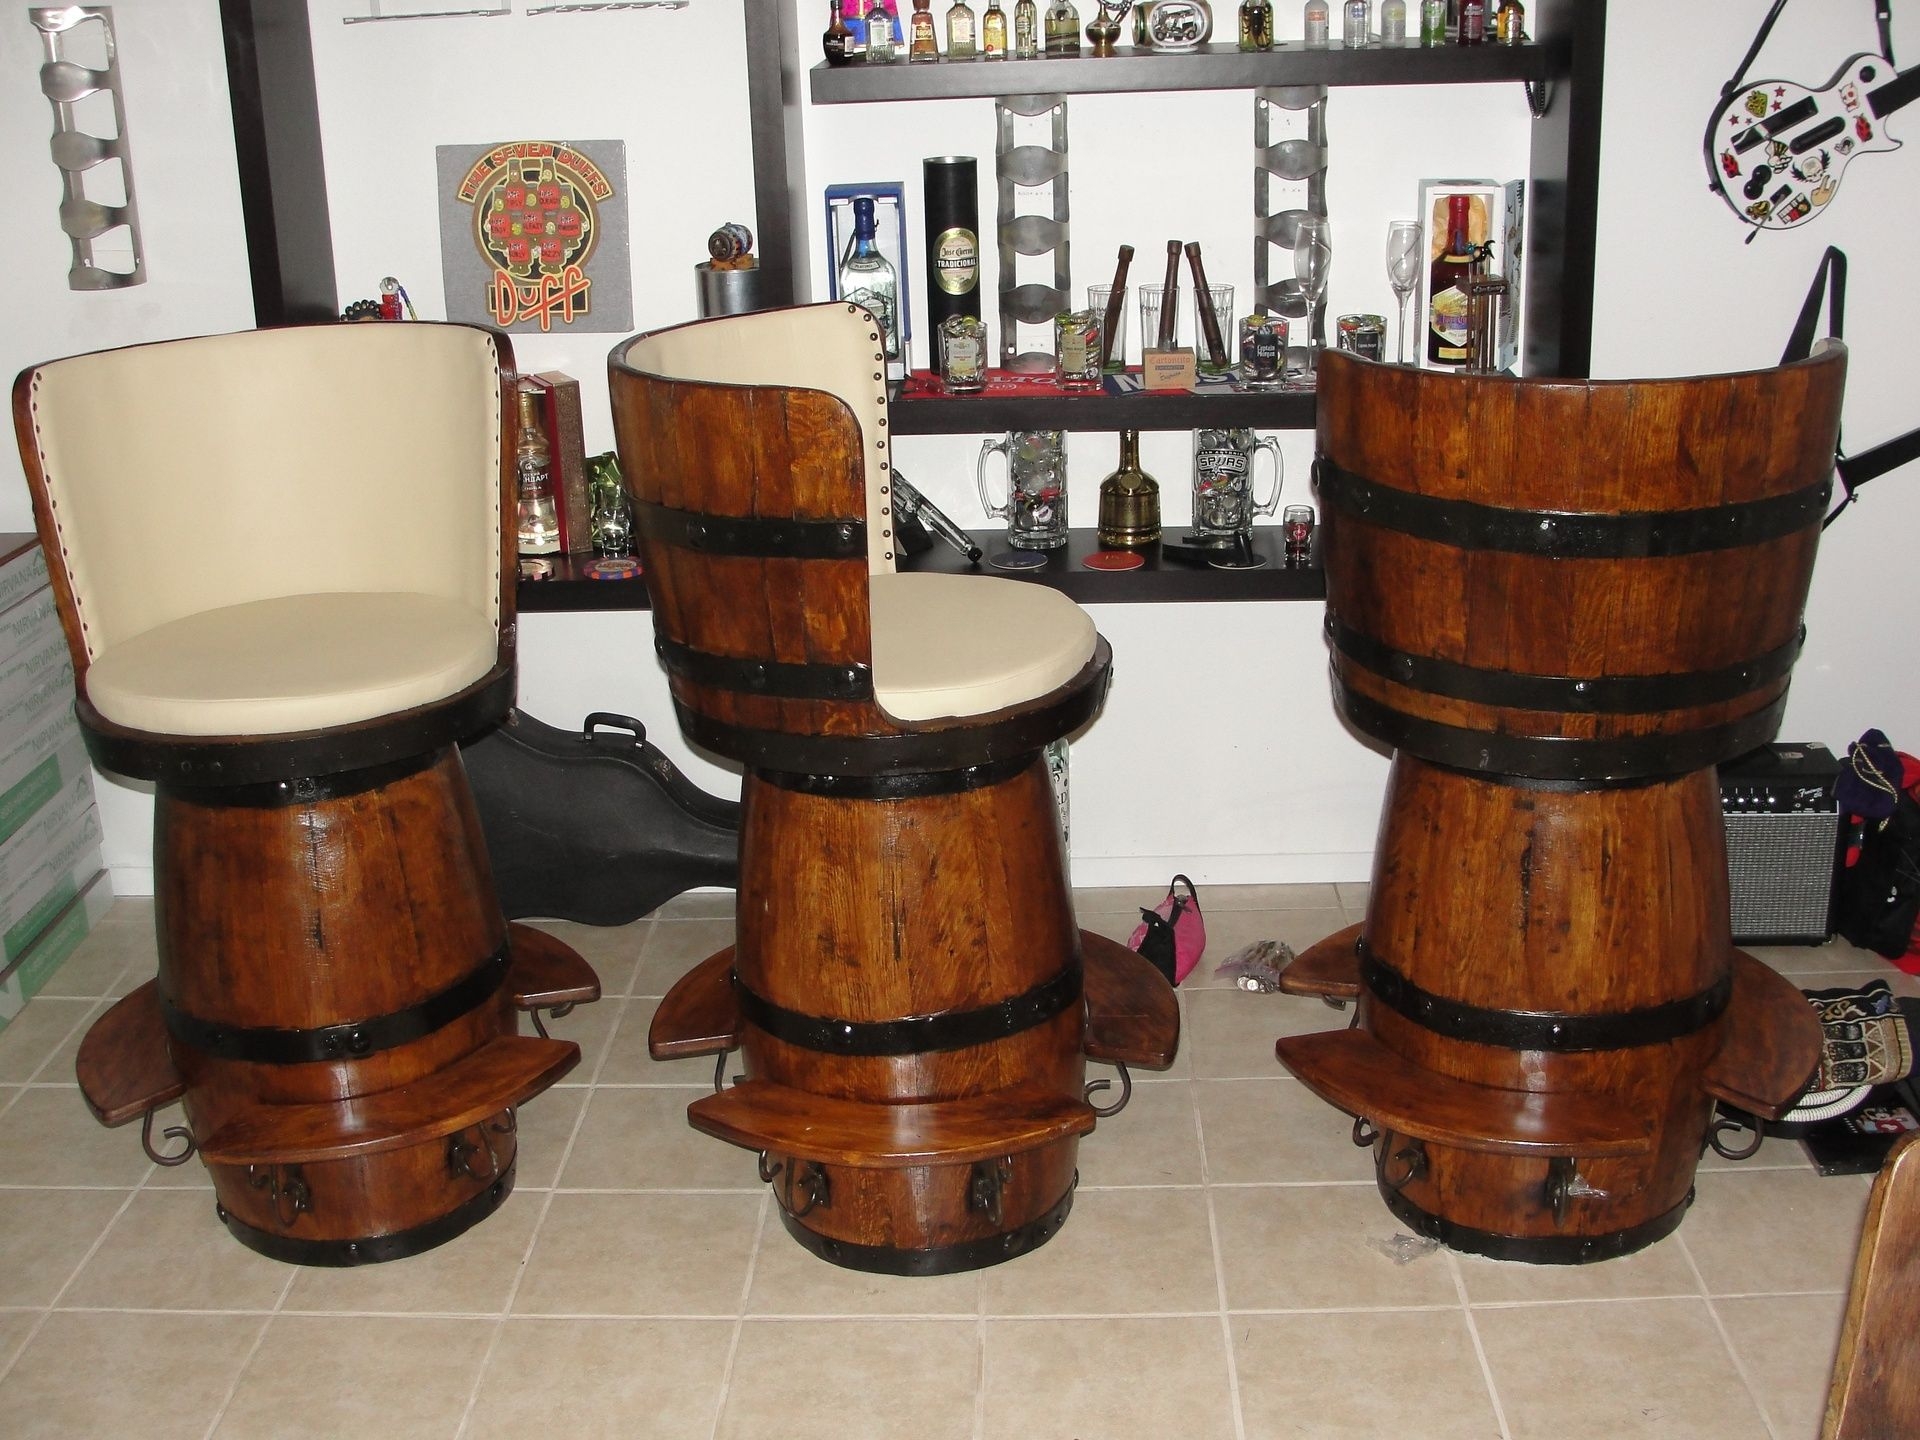 Huge bar stools made out of tequila barrels great for